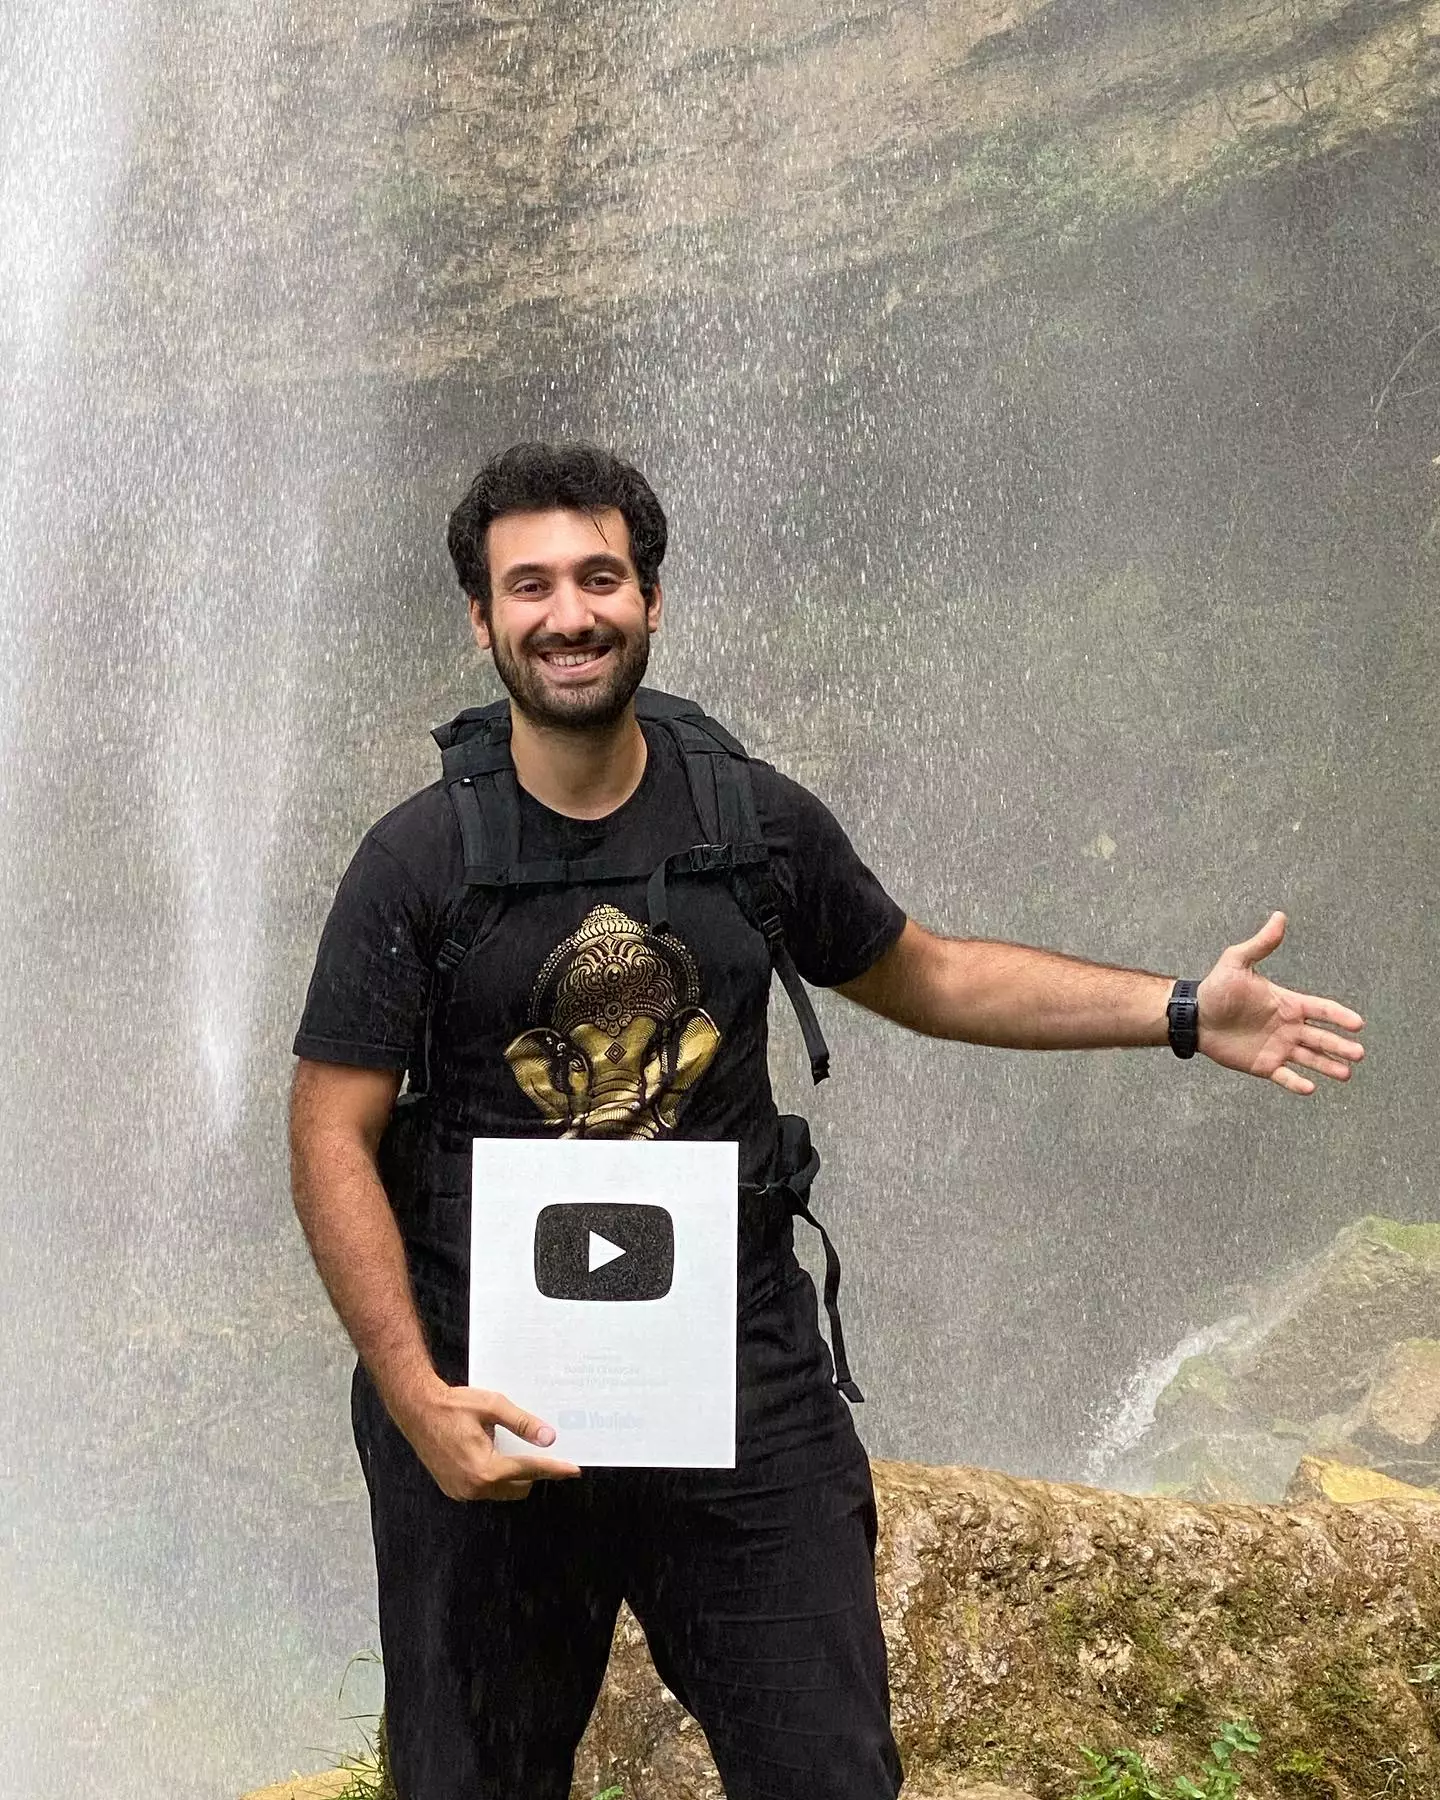 Bashir shares adventure content on YouTube.